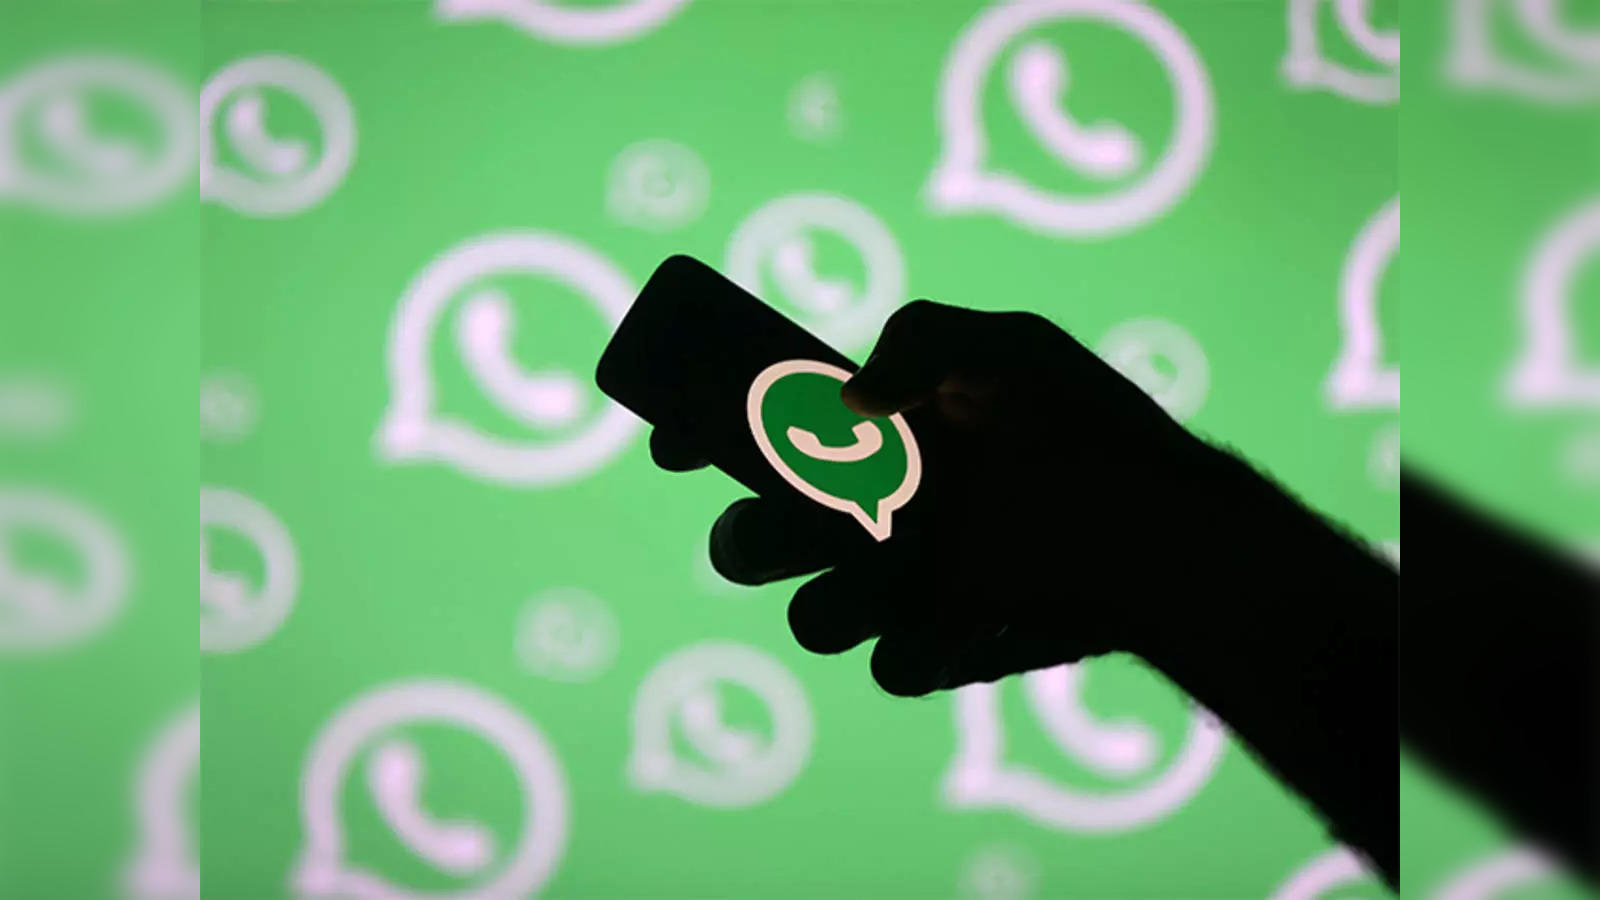 Restrict access to profile picture - 7 must-know WhatsApp tips